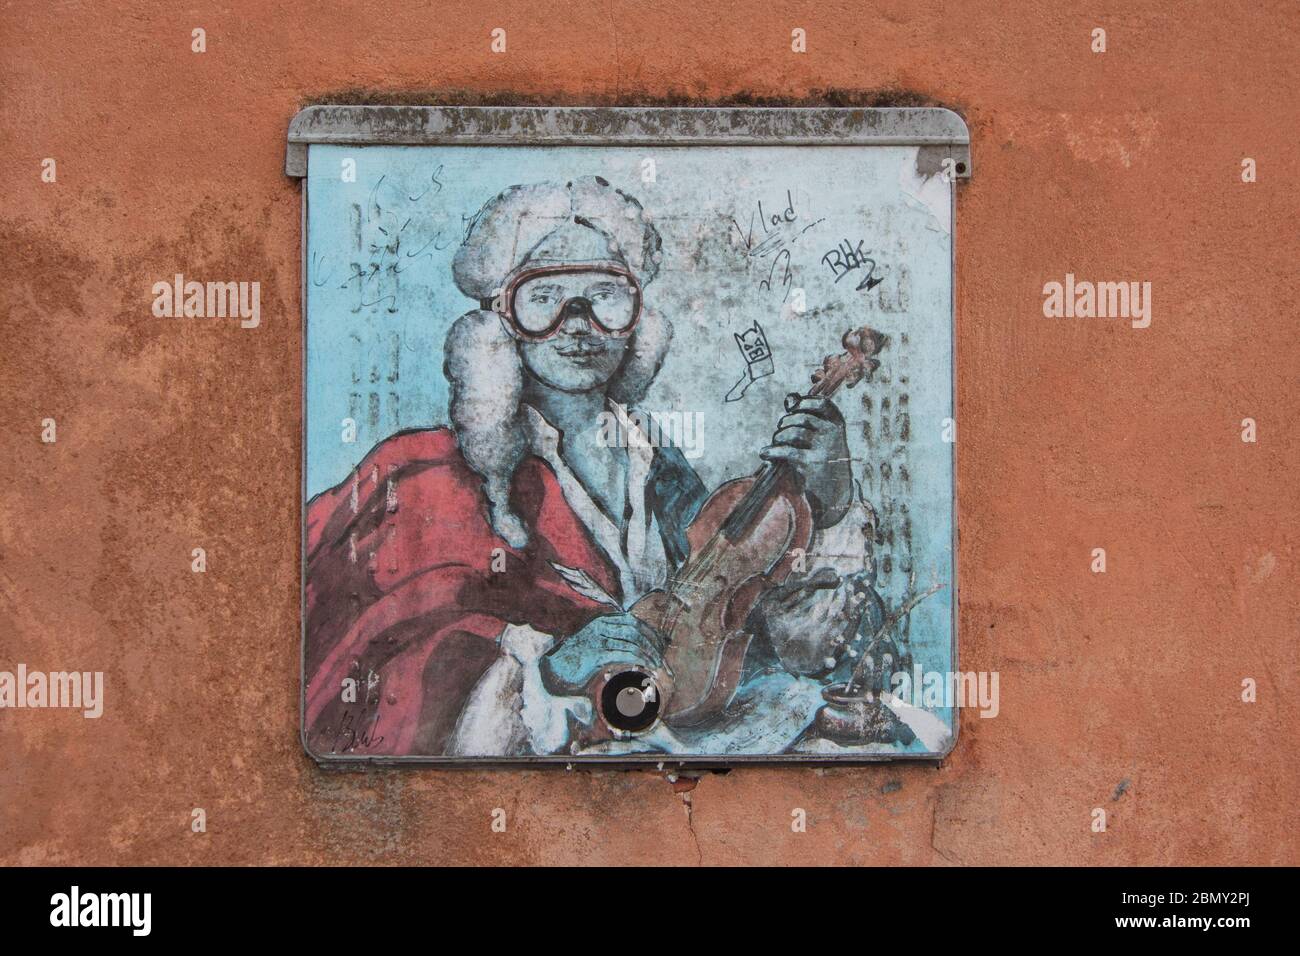 VENICE, ITALY - MAY 08: A Graffiti of Blu is seen on a wall of a building. Stock Photo